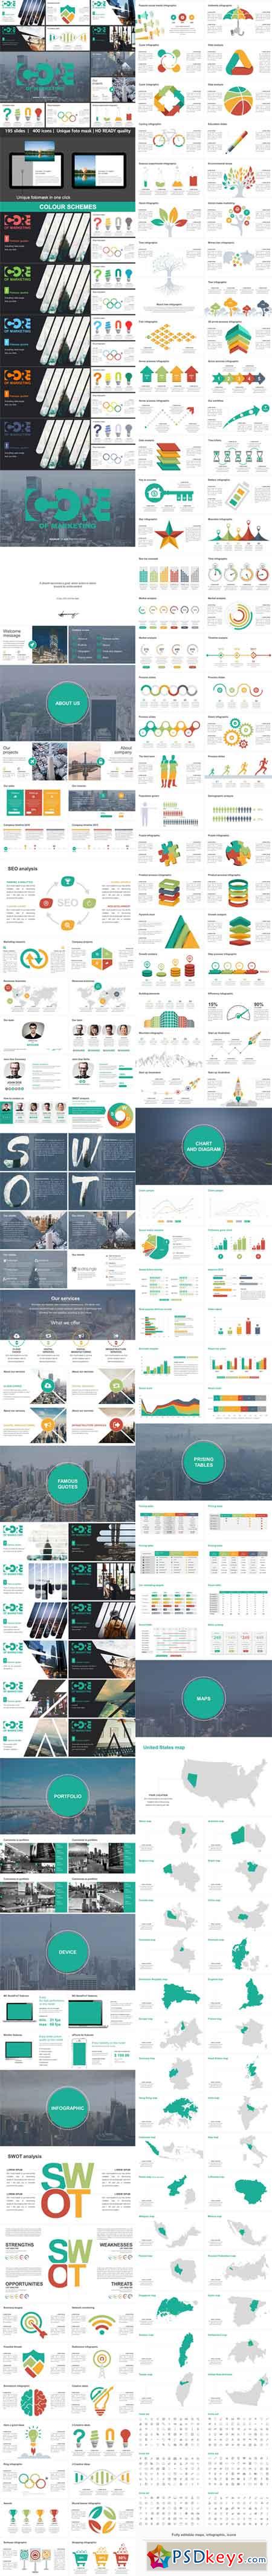 Core Of Marketing Powerpoint Creative Template 17460845